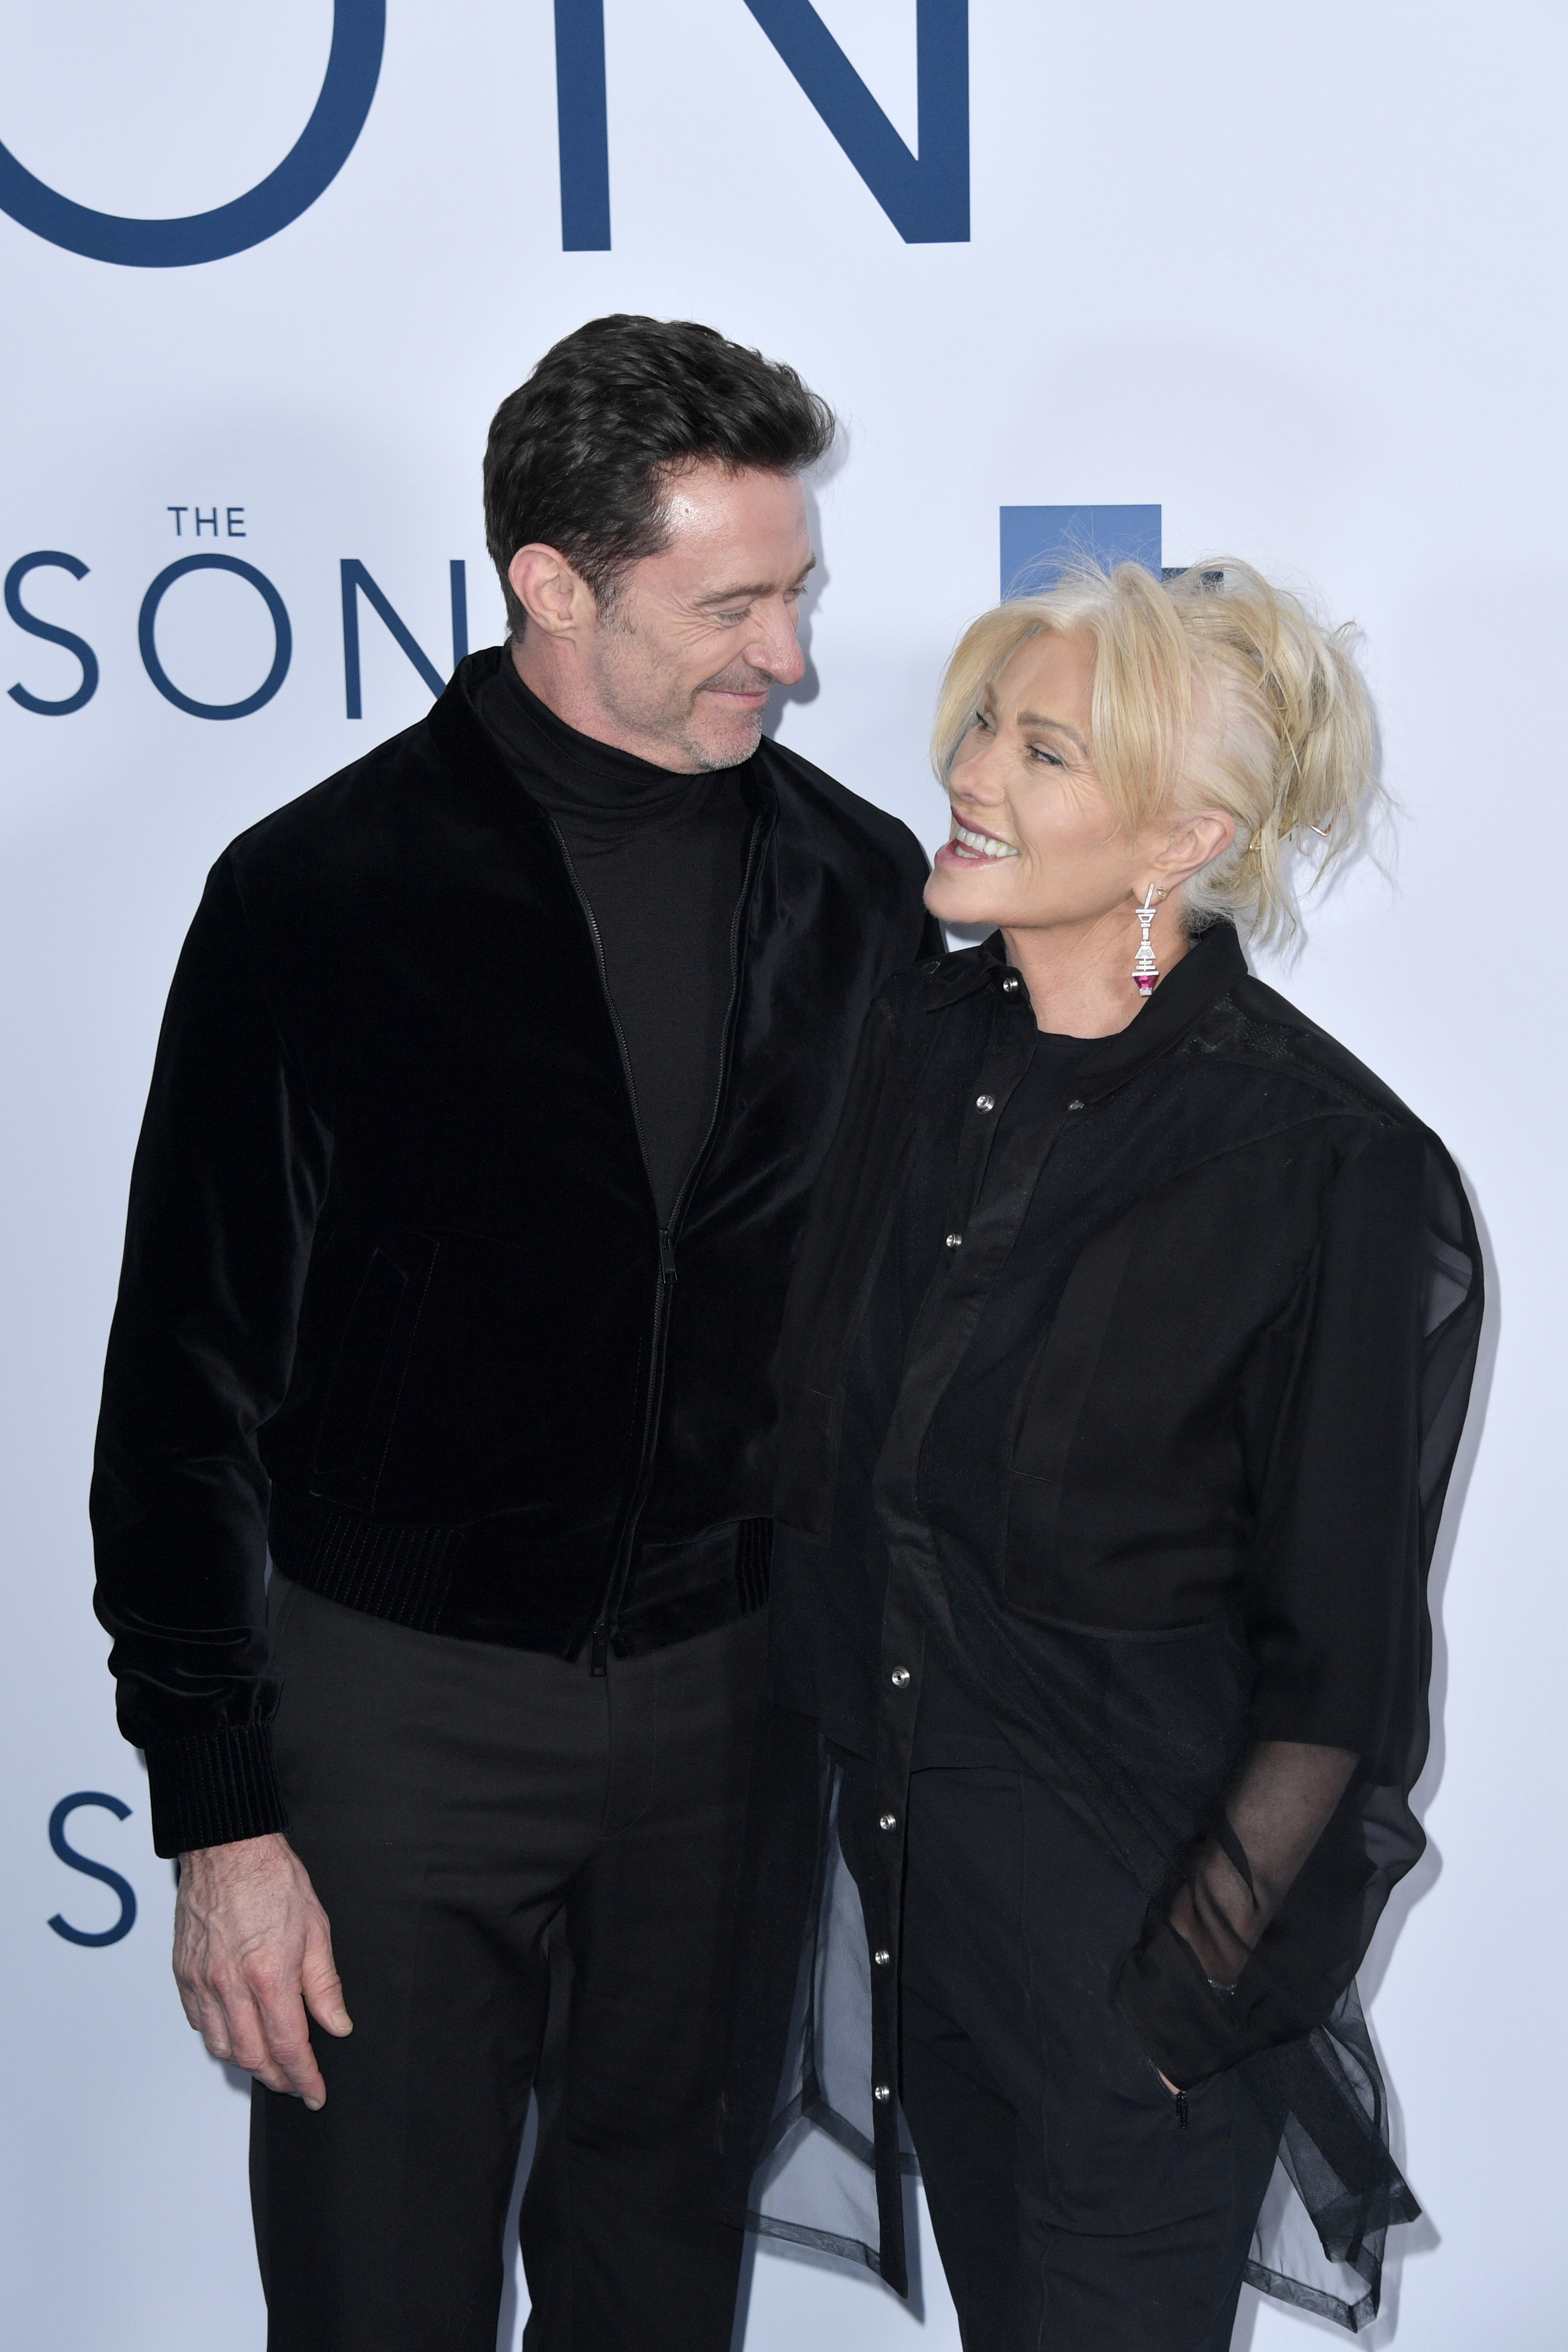 Hugh Jackman and Deborra-Lee Furness at the "The Son" premiere on February 21, 2023, in Paris, France | Source: Getty Images